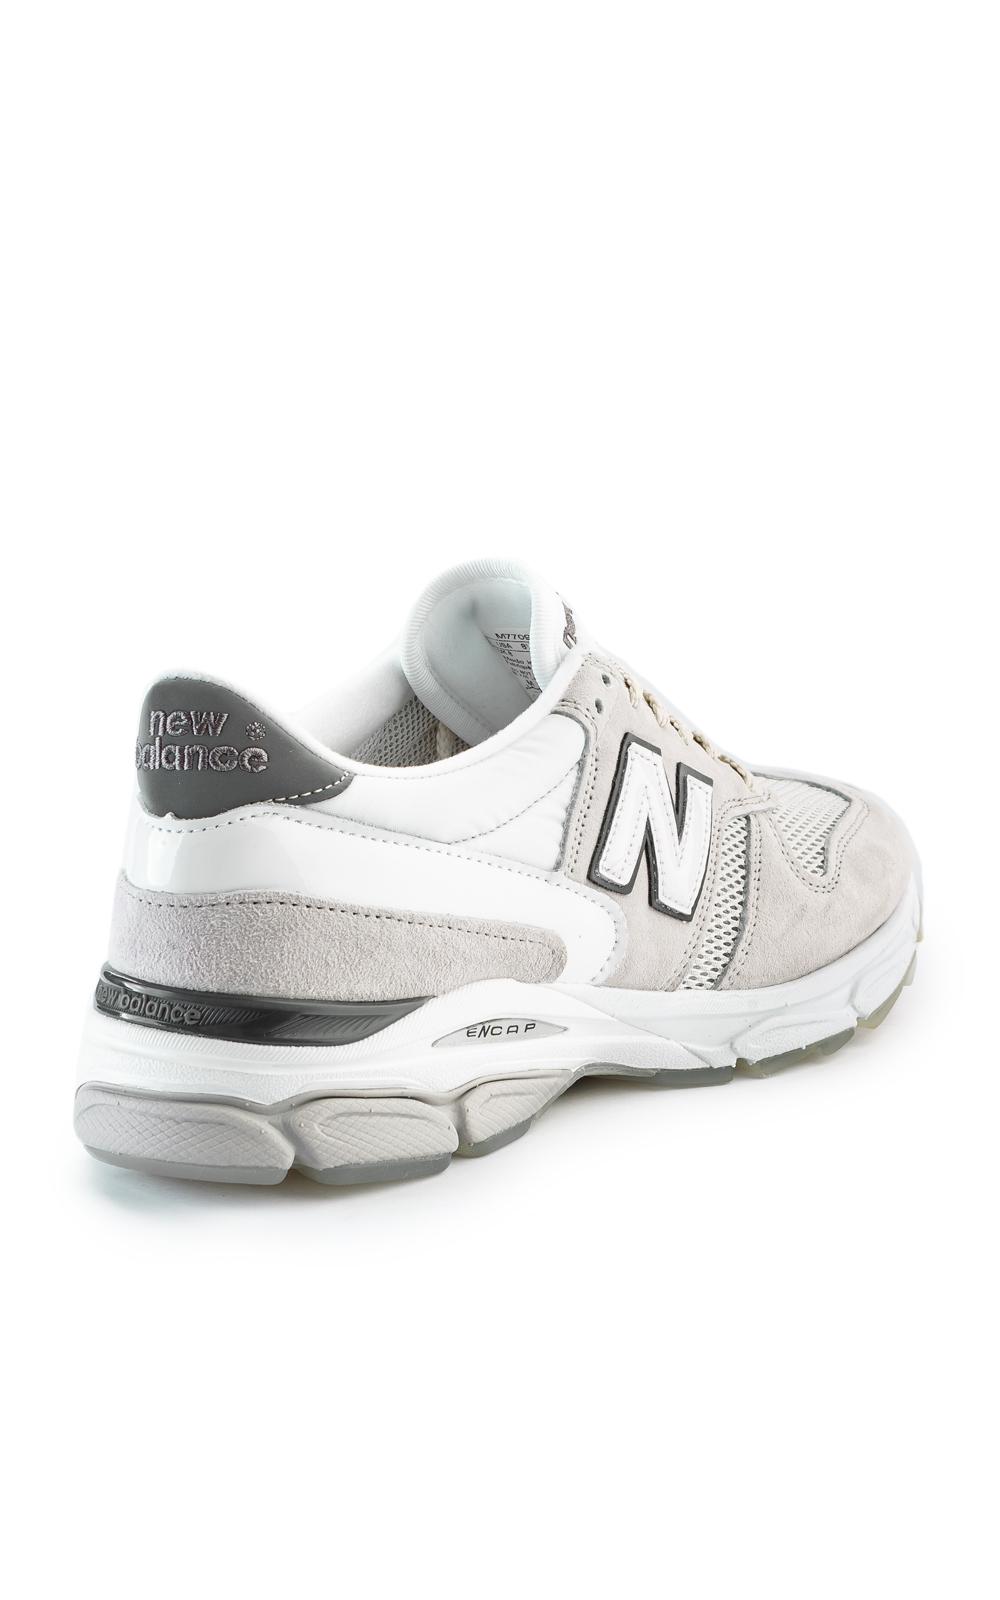 New Balance Leather M770.9 Cv Offwhite "caviar & Vodka Pack" for Men - Lyst